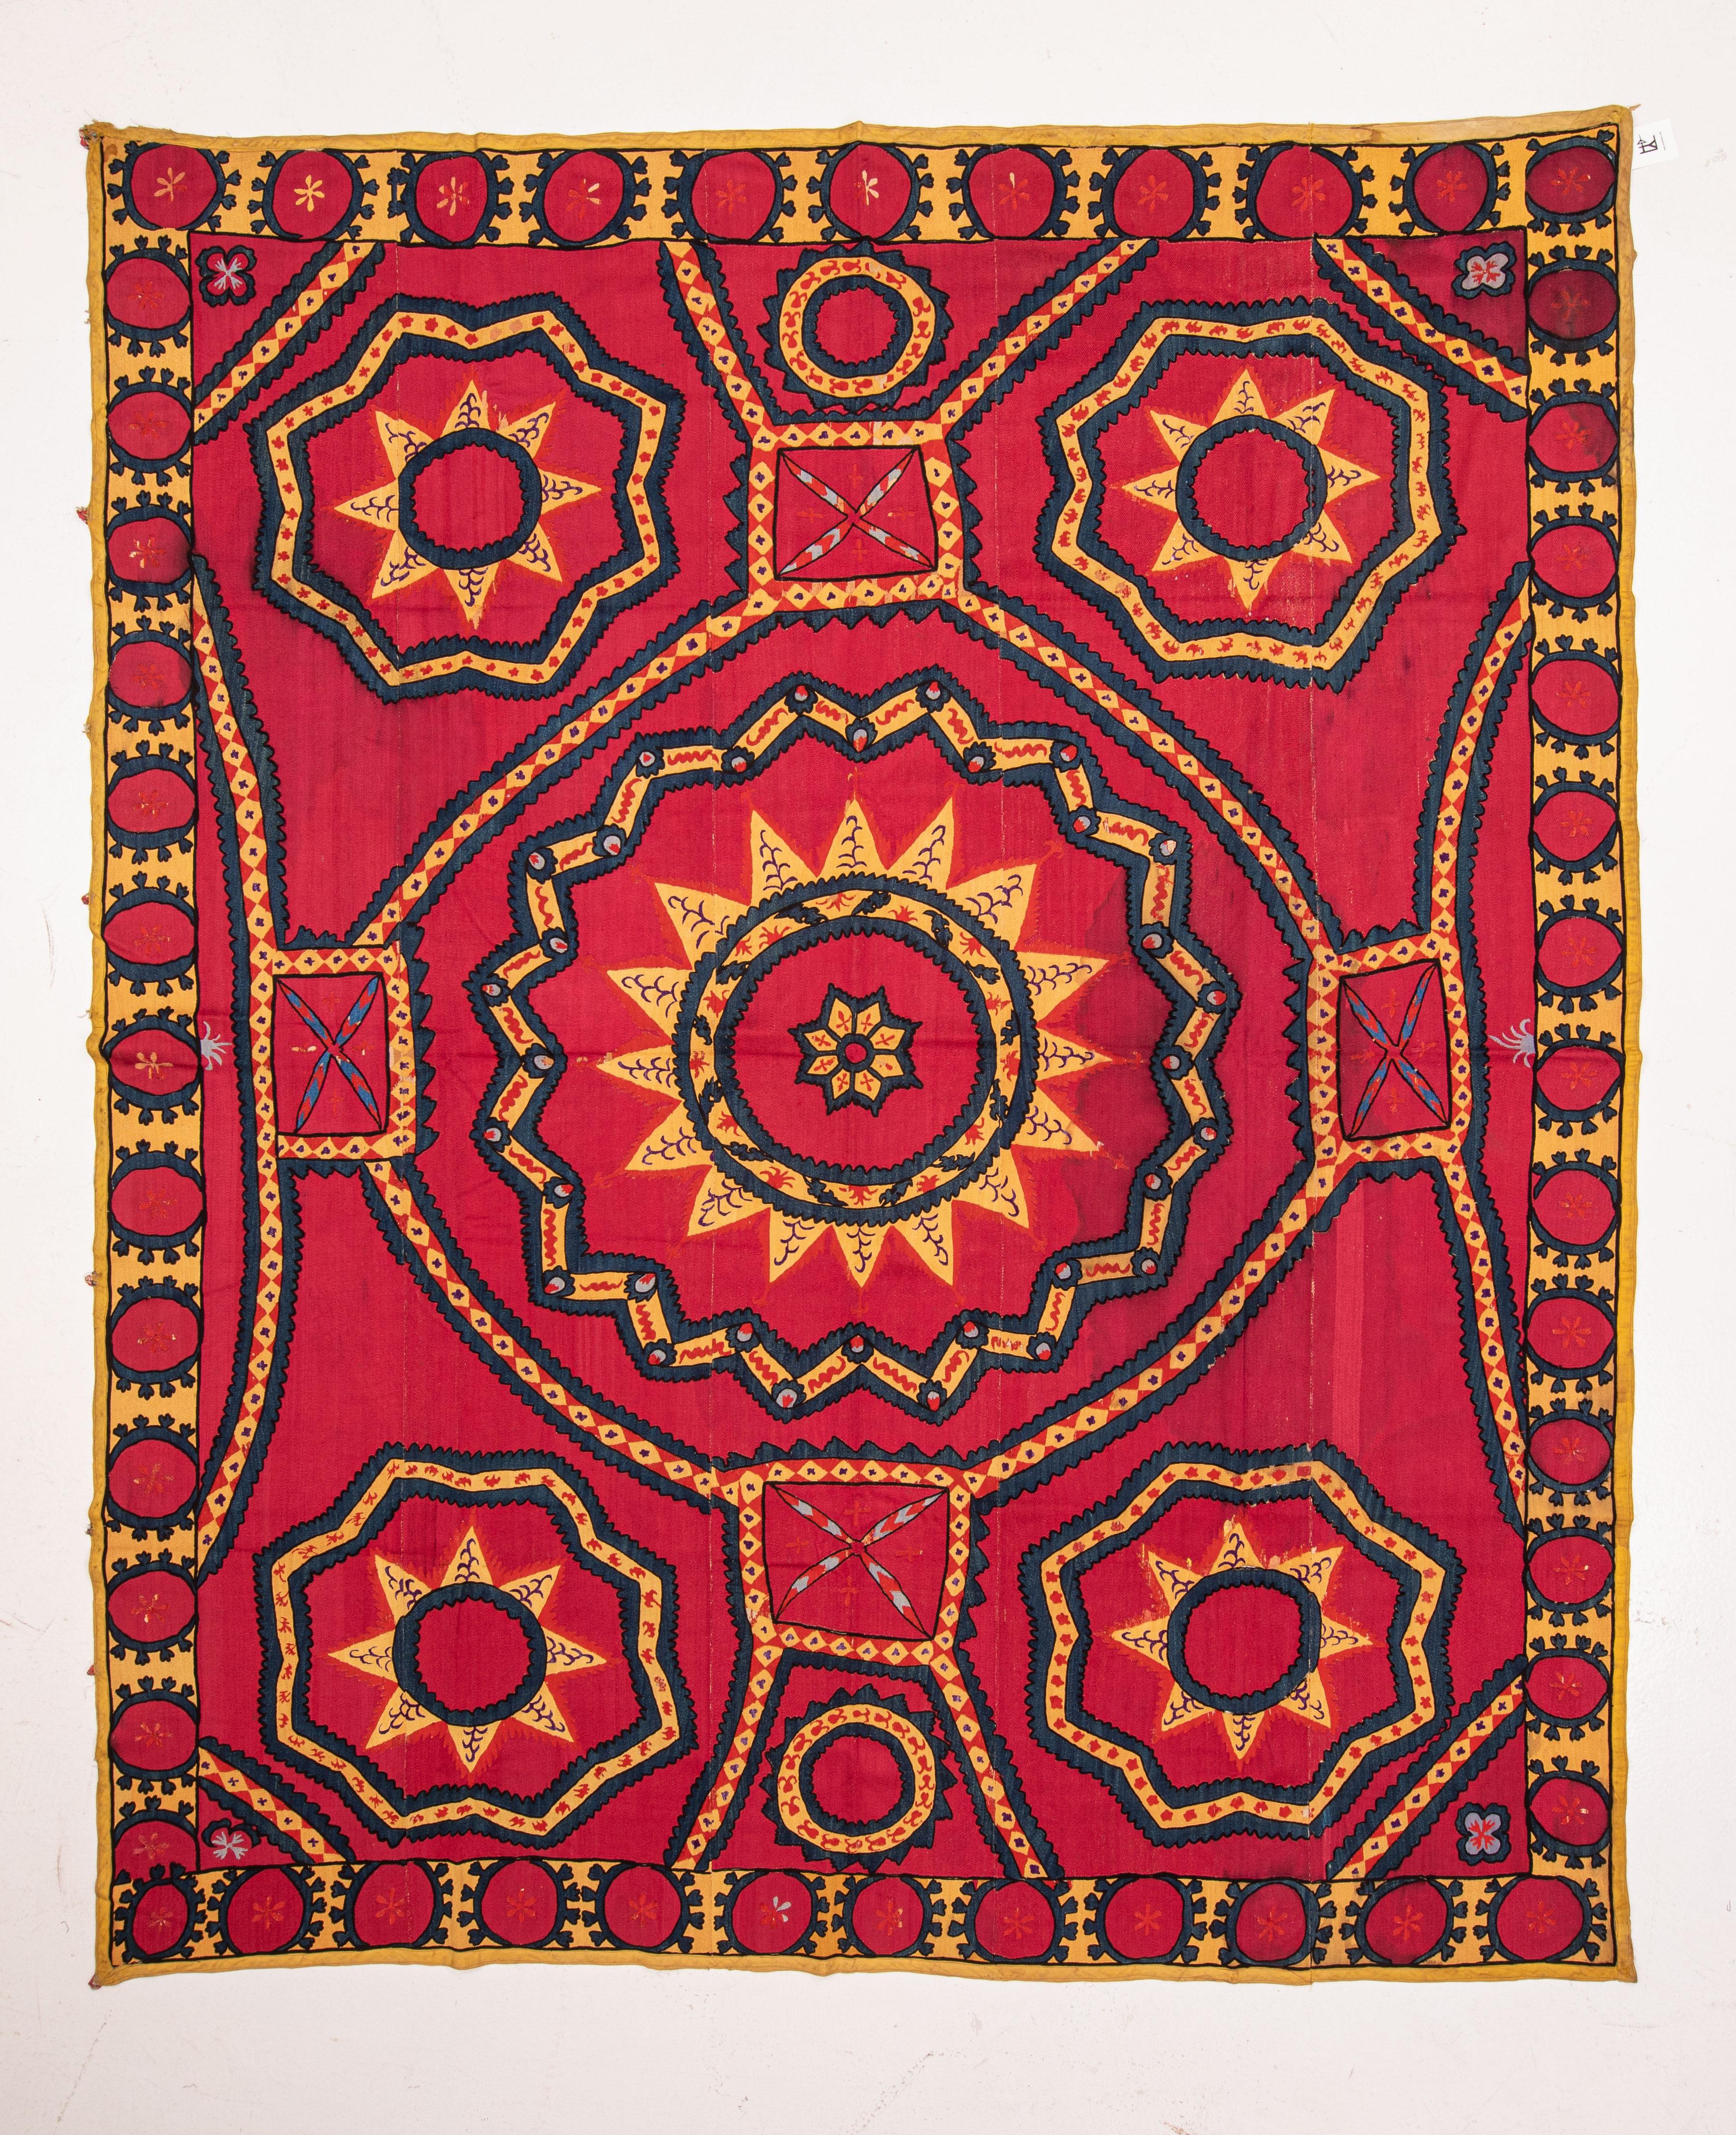 Suzanis from the regions of Tashkent and Pishkent have some astral names such az ‘moon sky’,
‘star sky ‘. The main characteristic of these suzanis is that of their being fully embroidered in silk and sometimes in wool in sections.
Ground cloth is